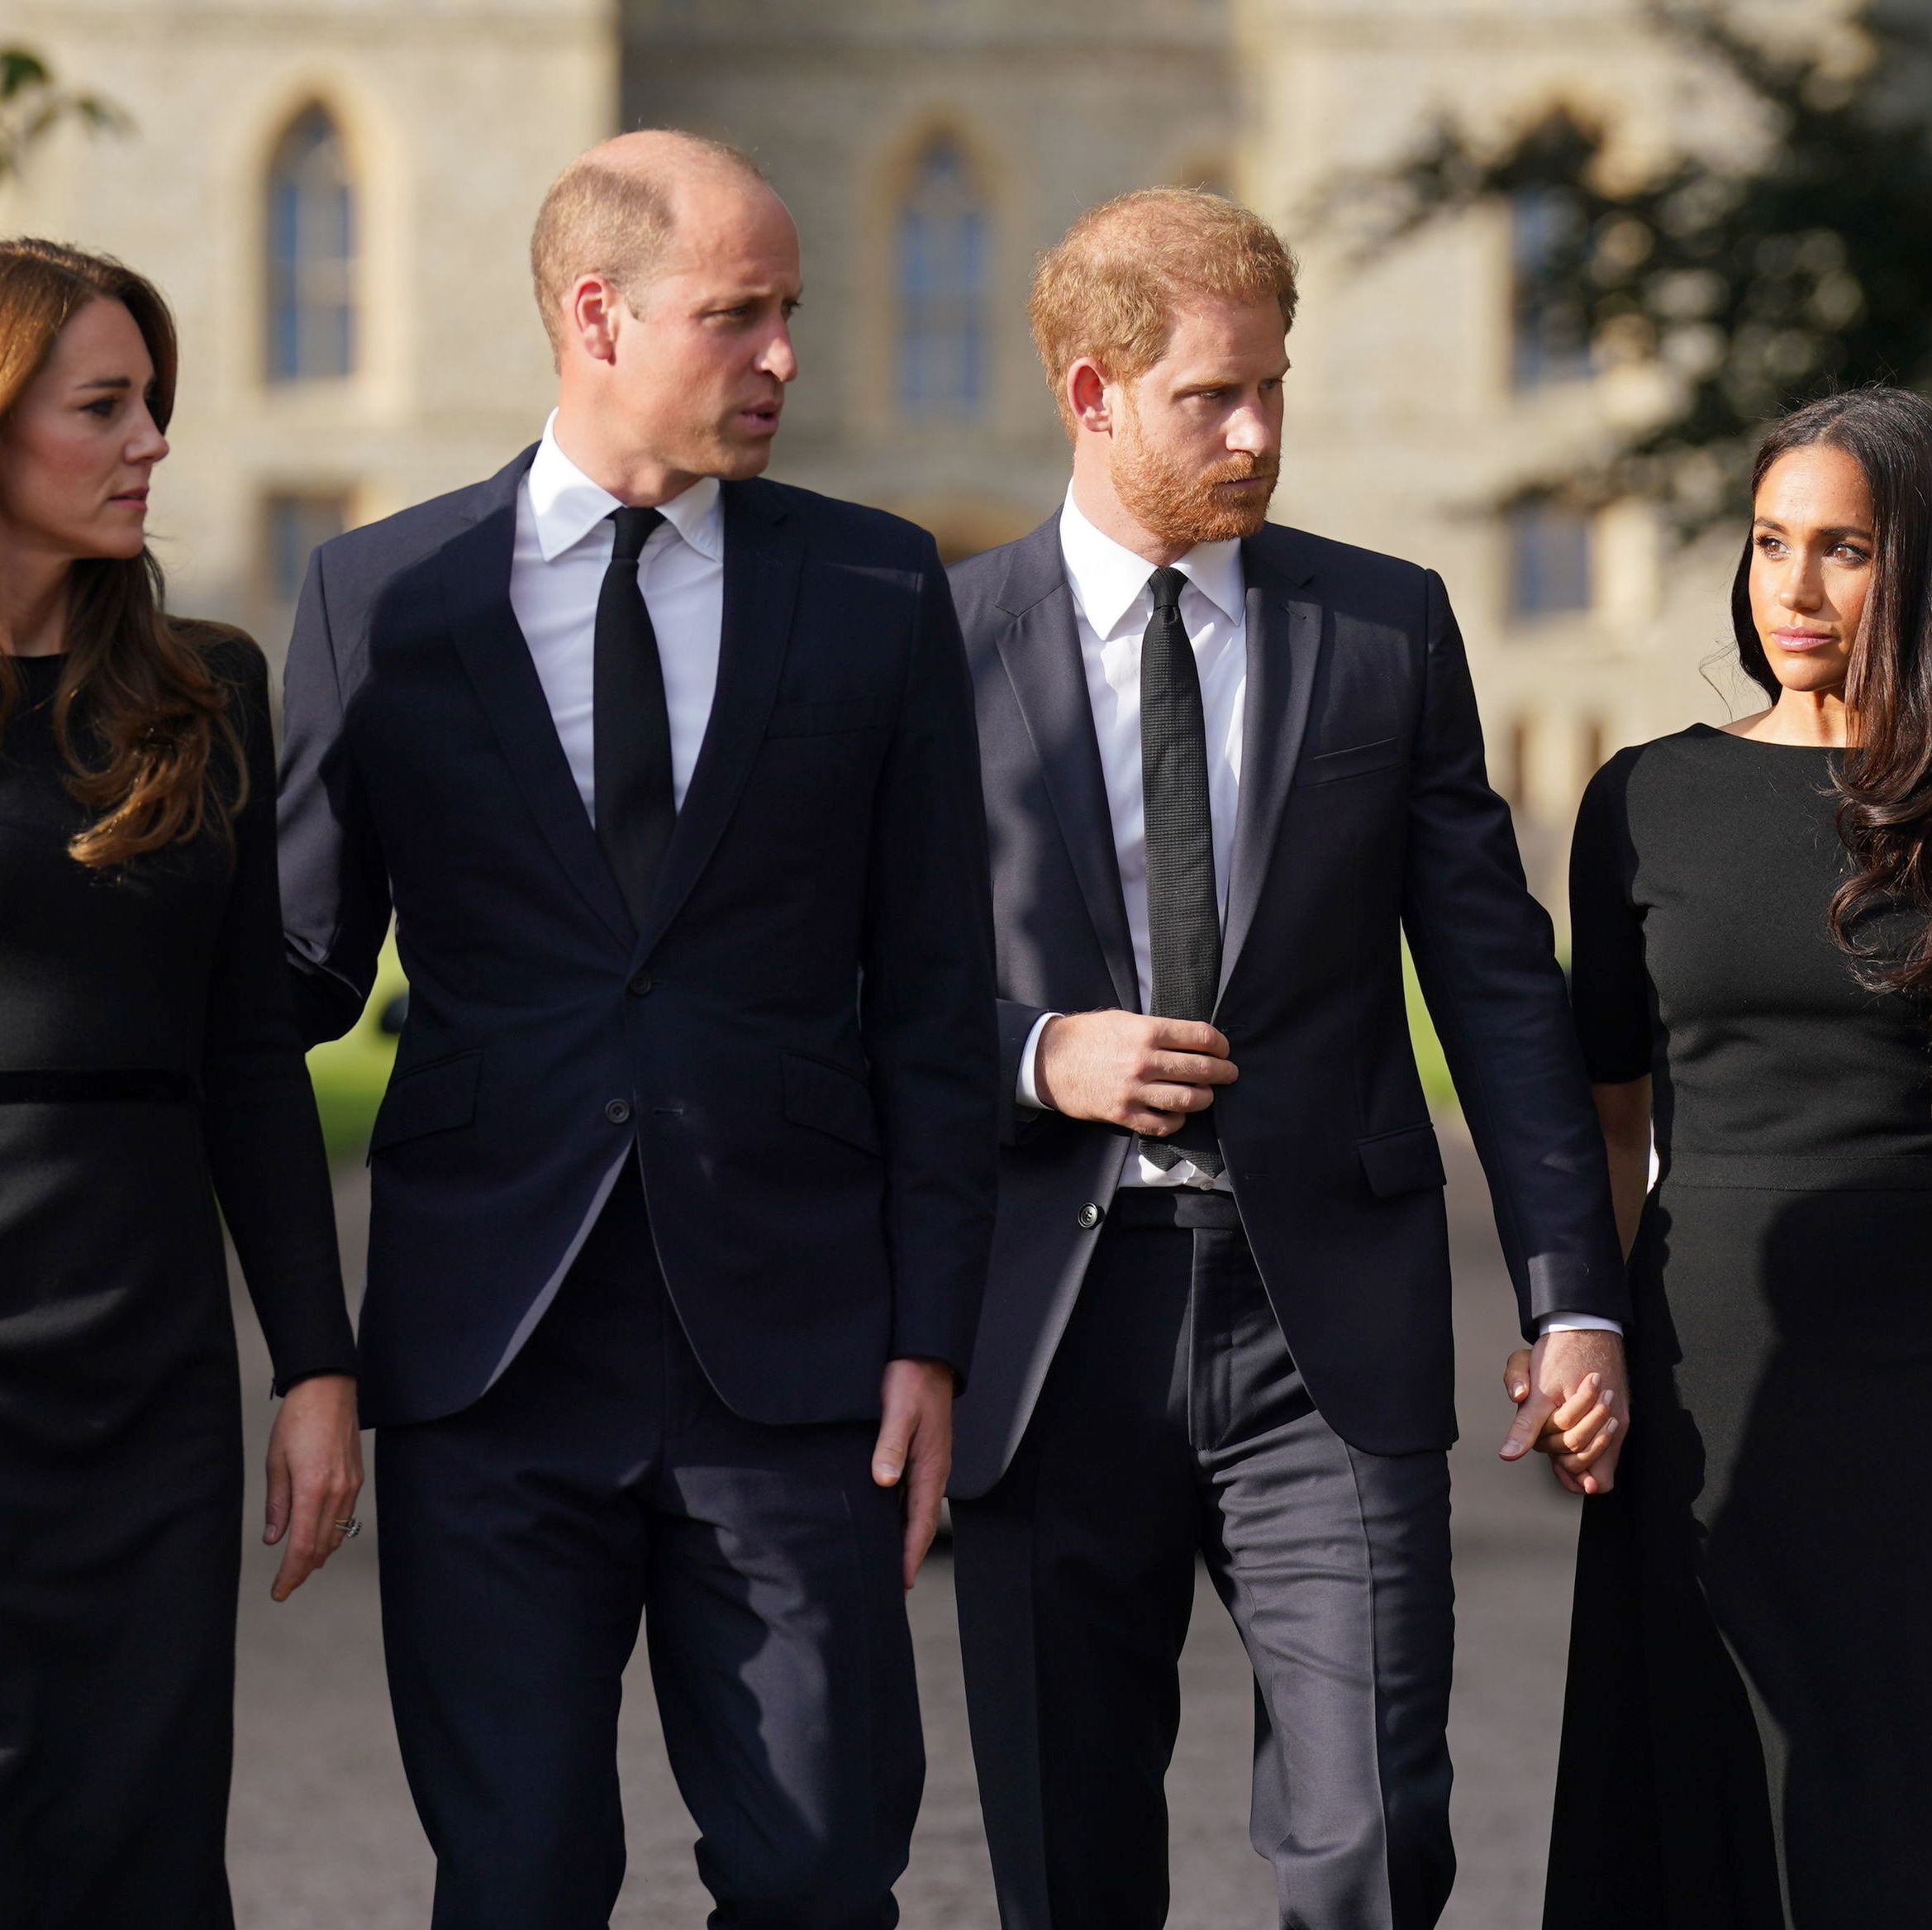 A new book details how Kate and William really saw Meghan and Harry permanently stepping back from royal family roles.